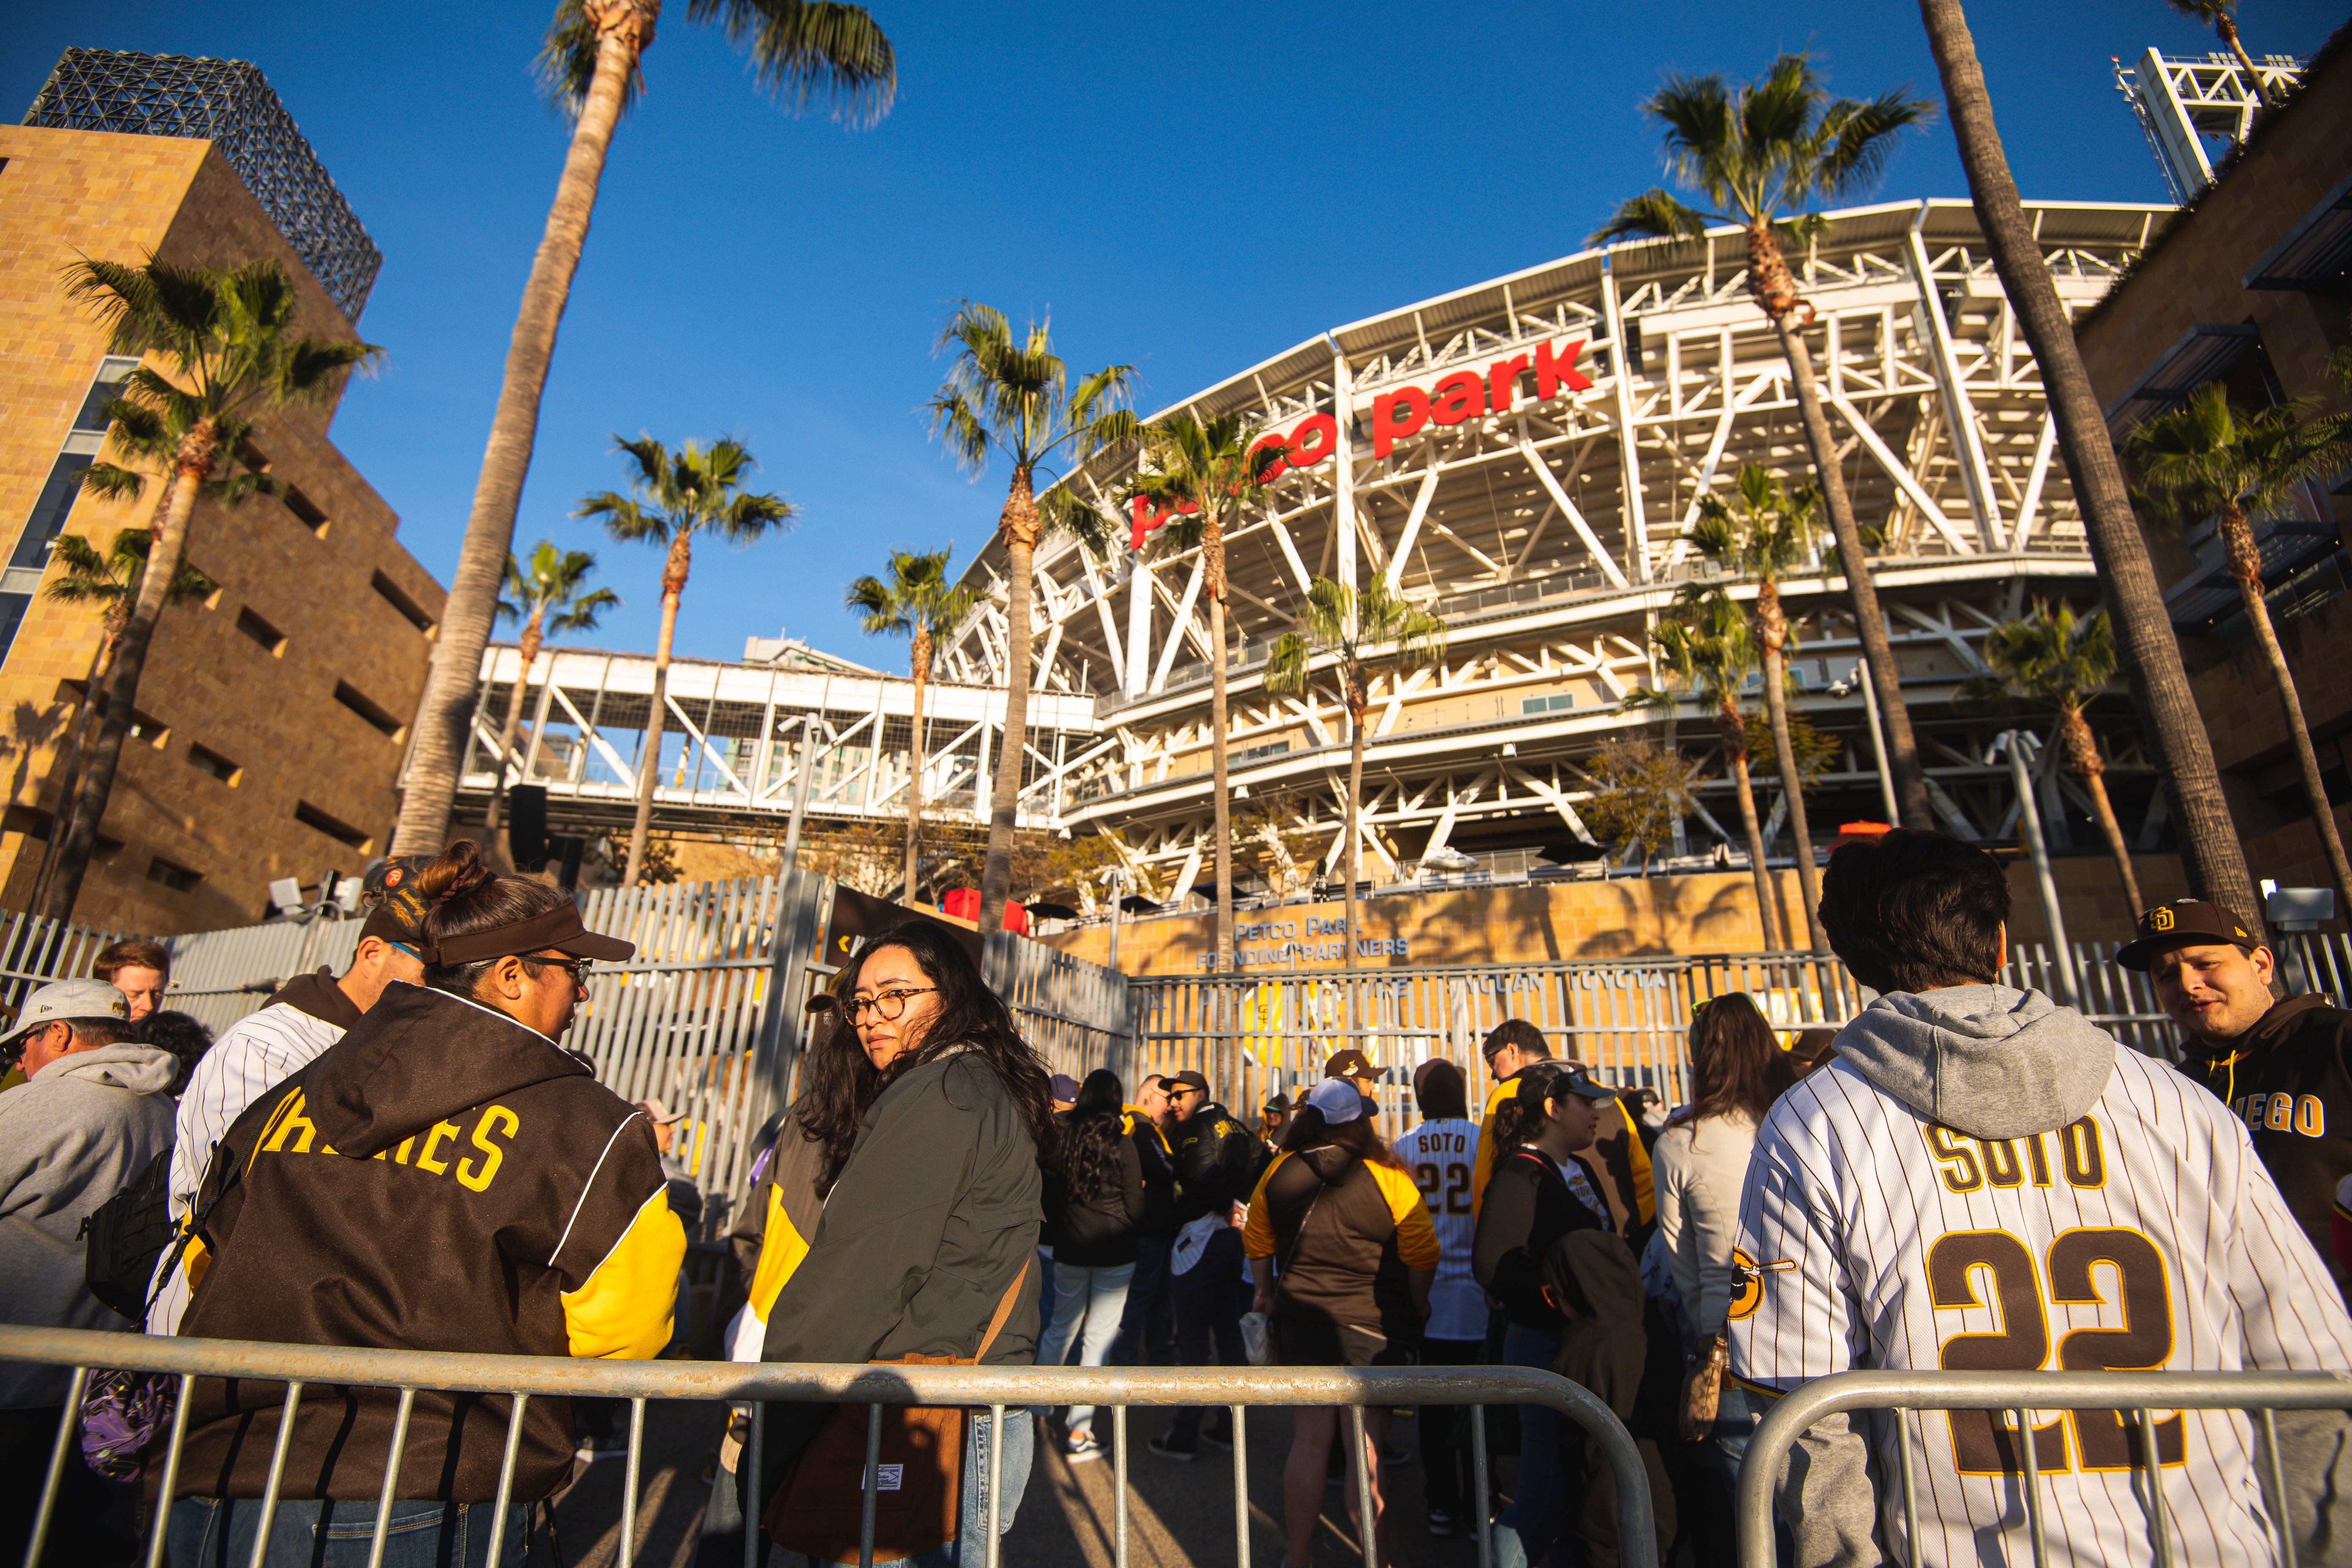 Happy fans go crazy at 2014 Padres FanFest! – Cool San Diego Sights!